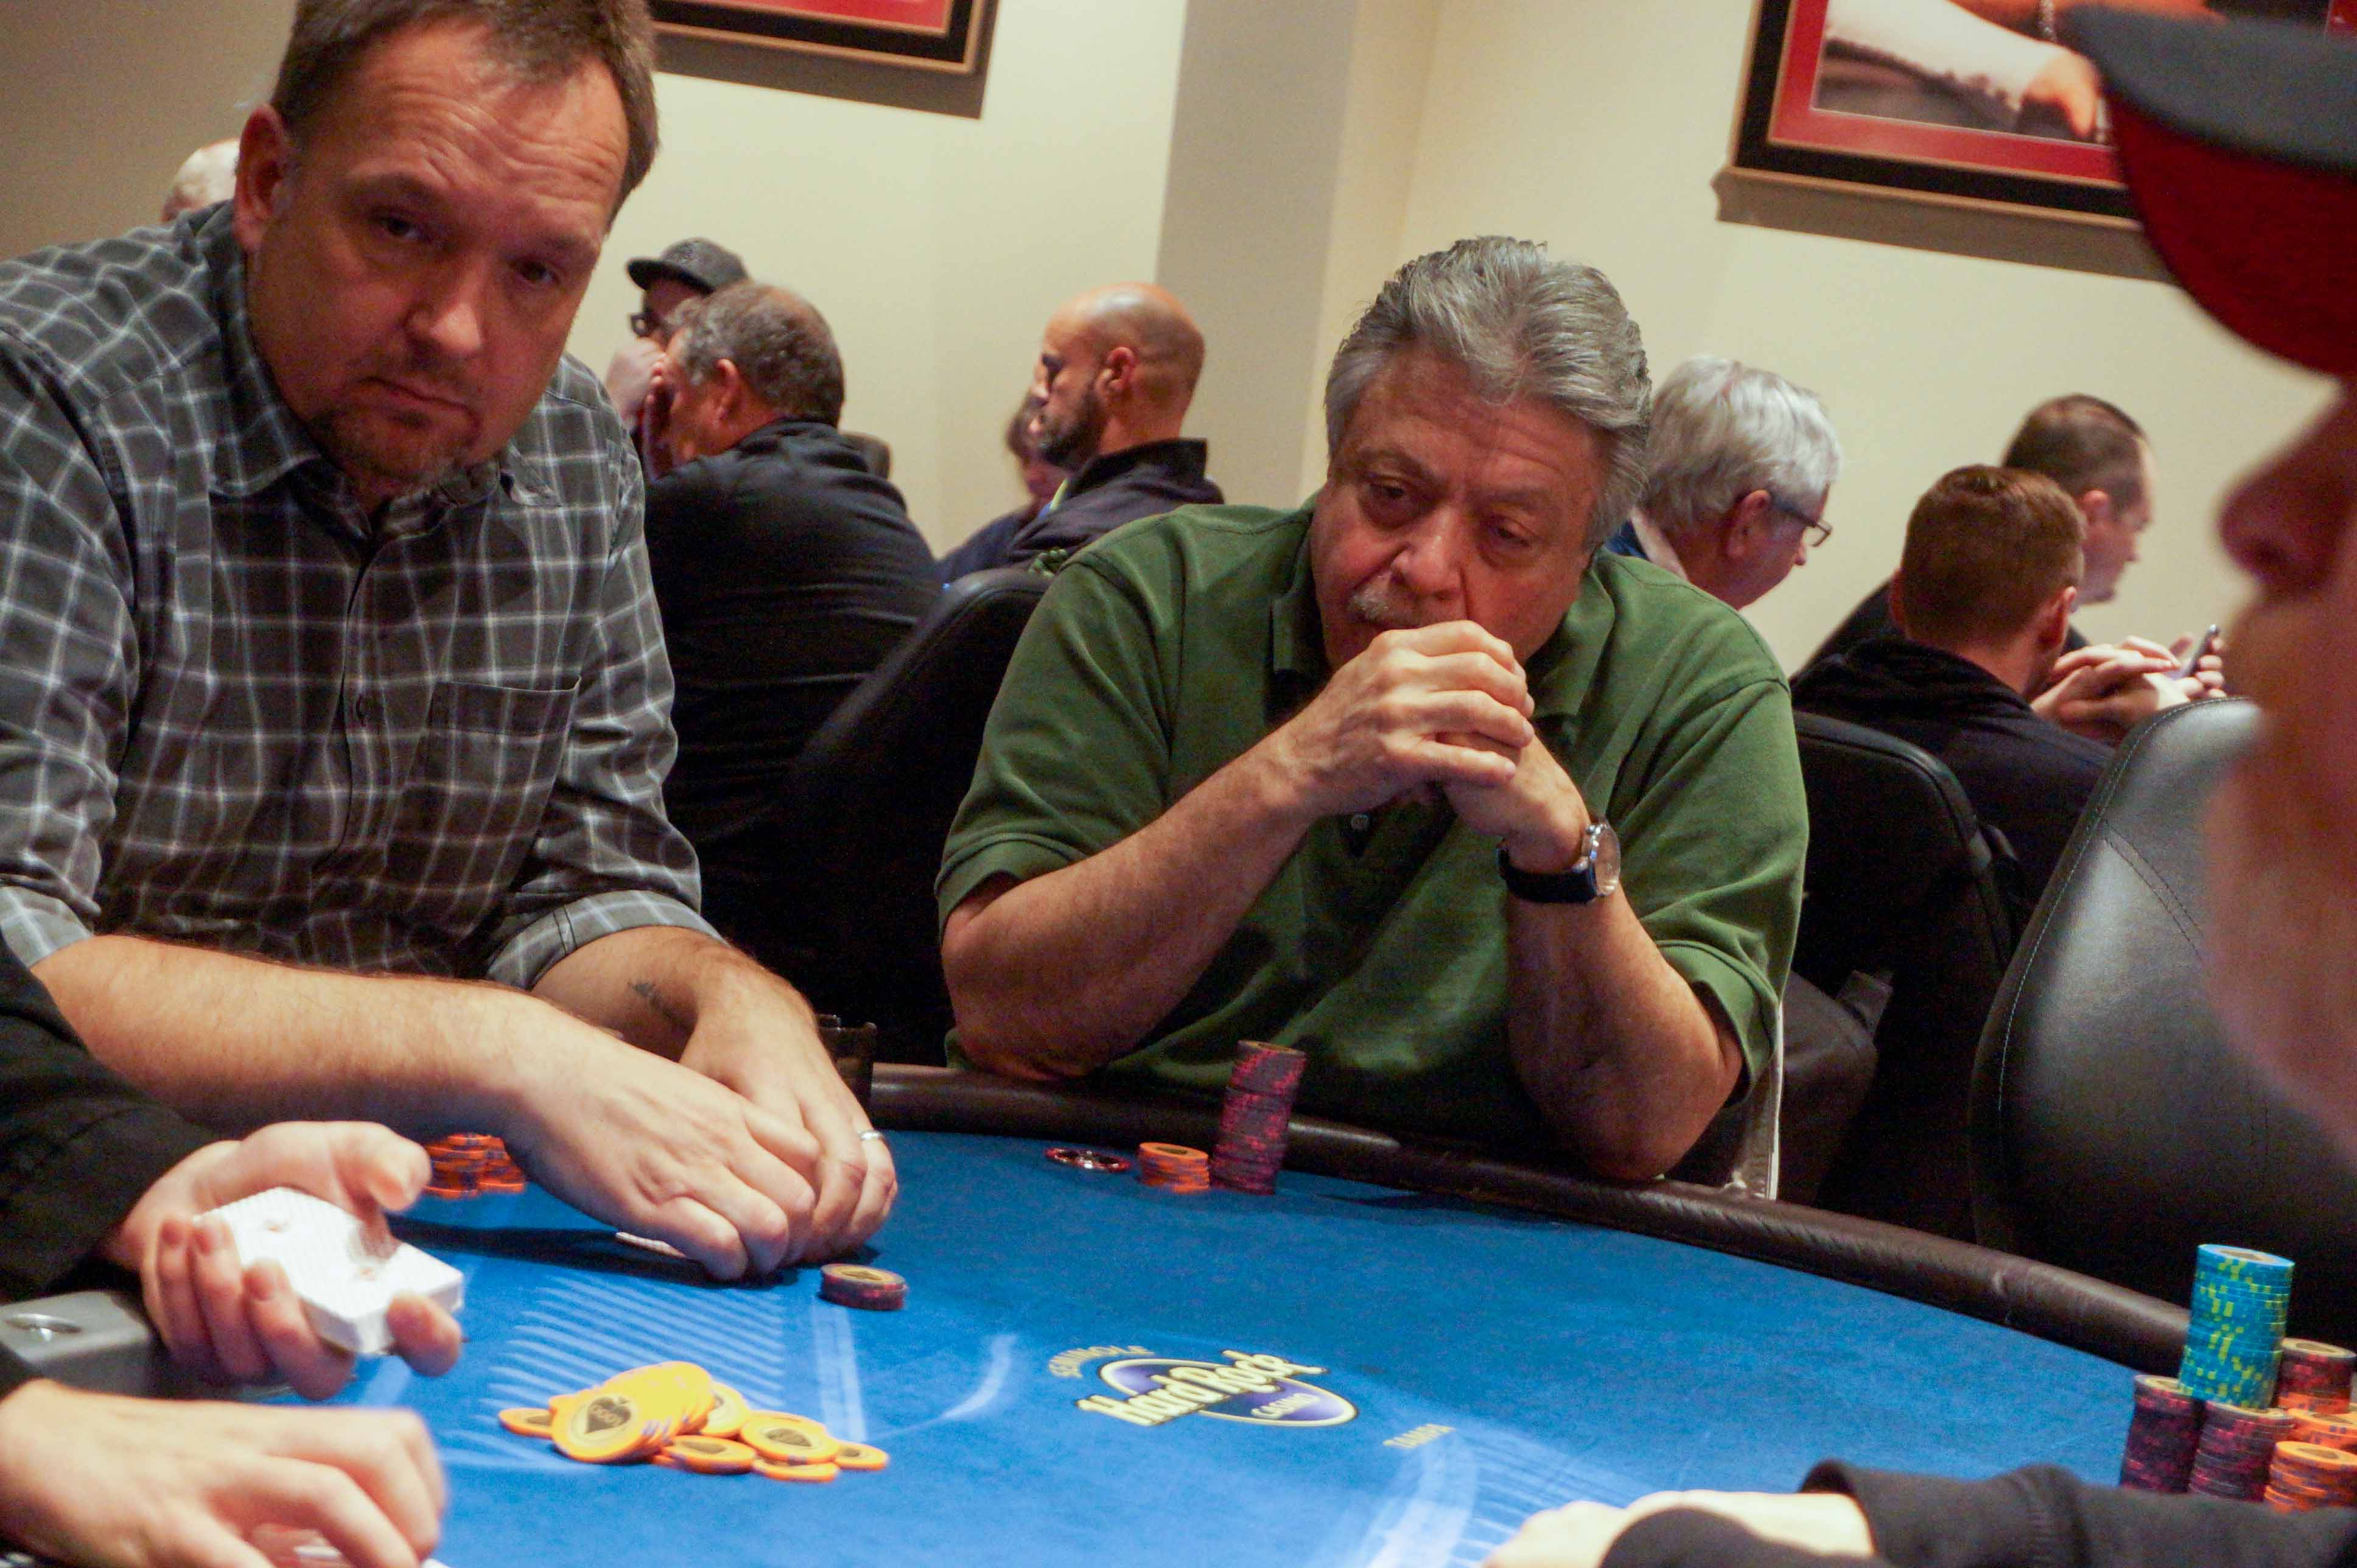 Peter Dalcamo - Eliminated in 8th place ($613)